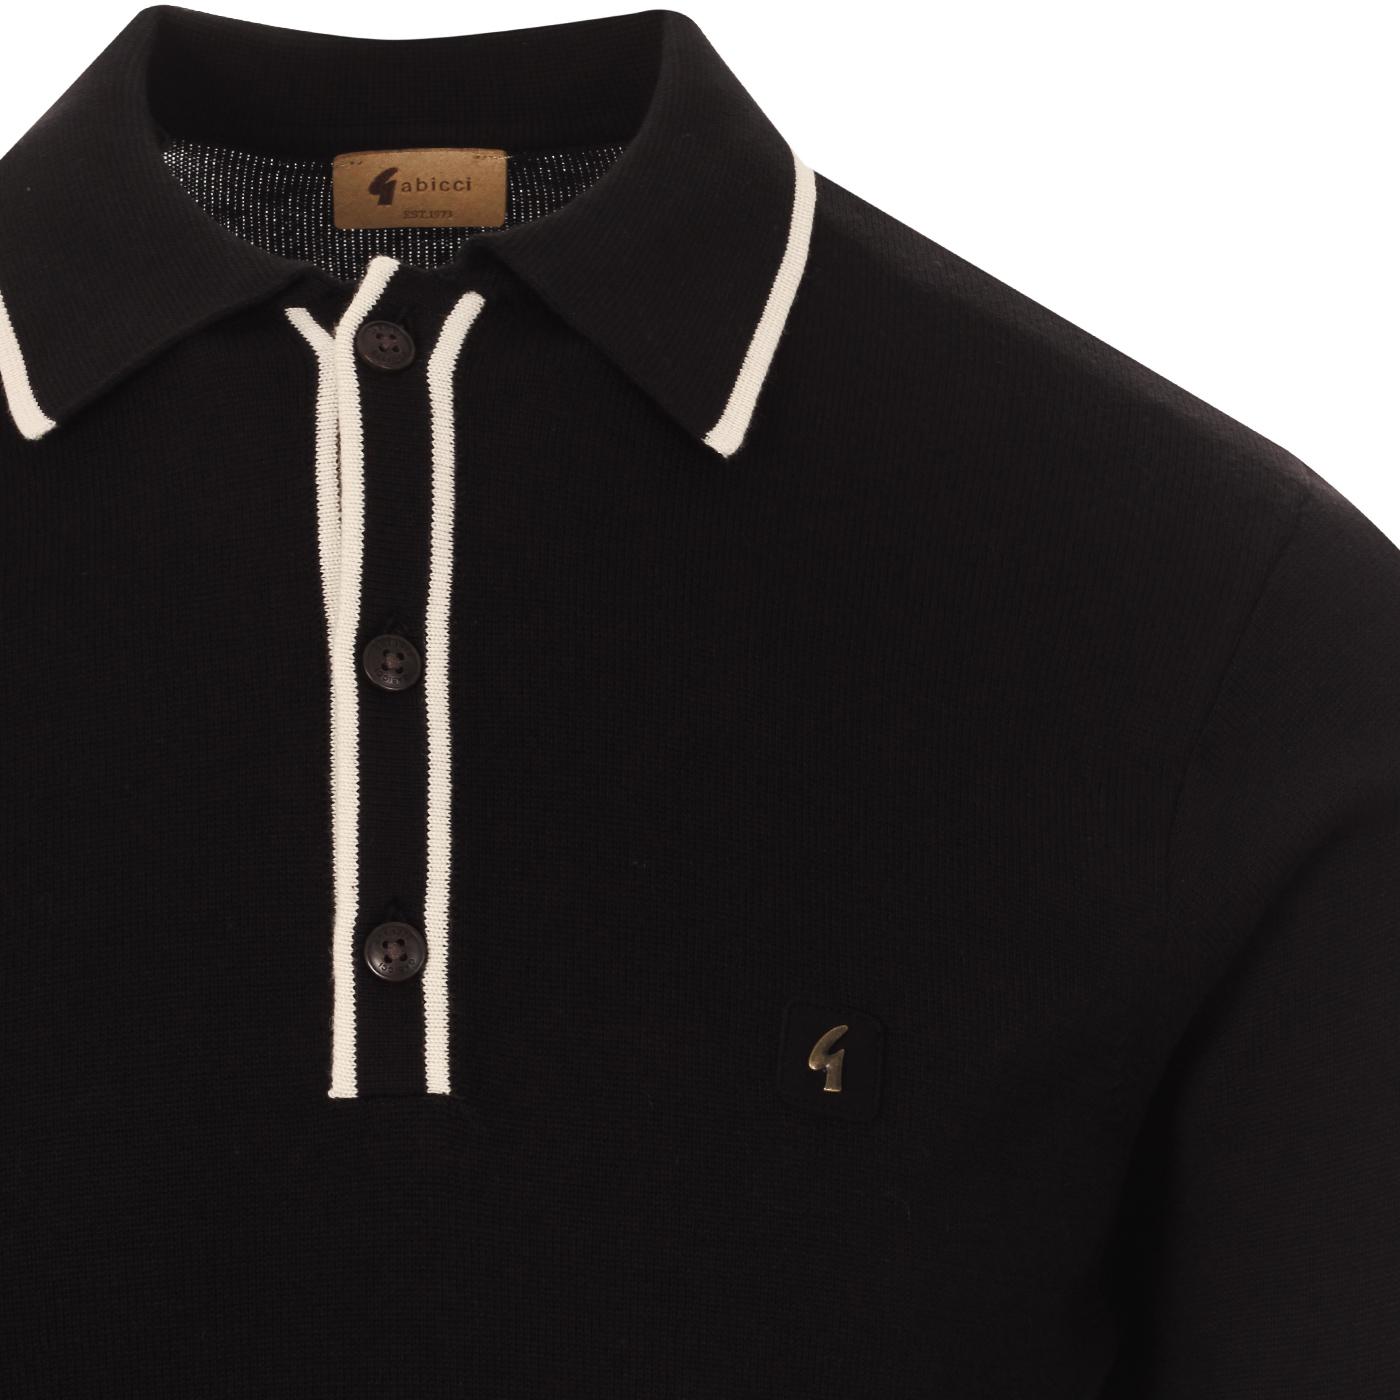 GABICCI VINTAGE Lineker Mod Knitted Tipped Polo in Black